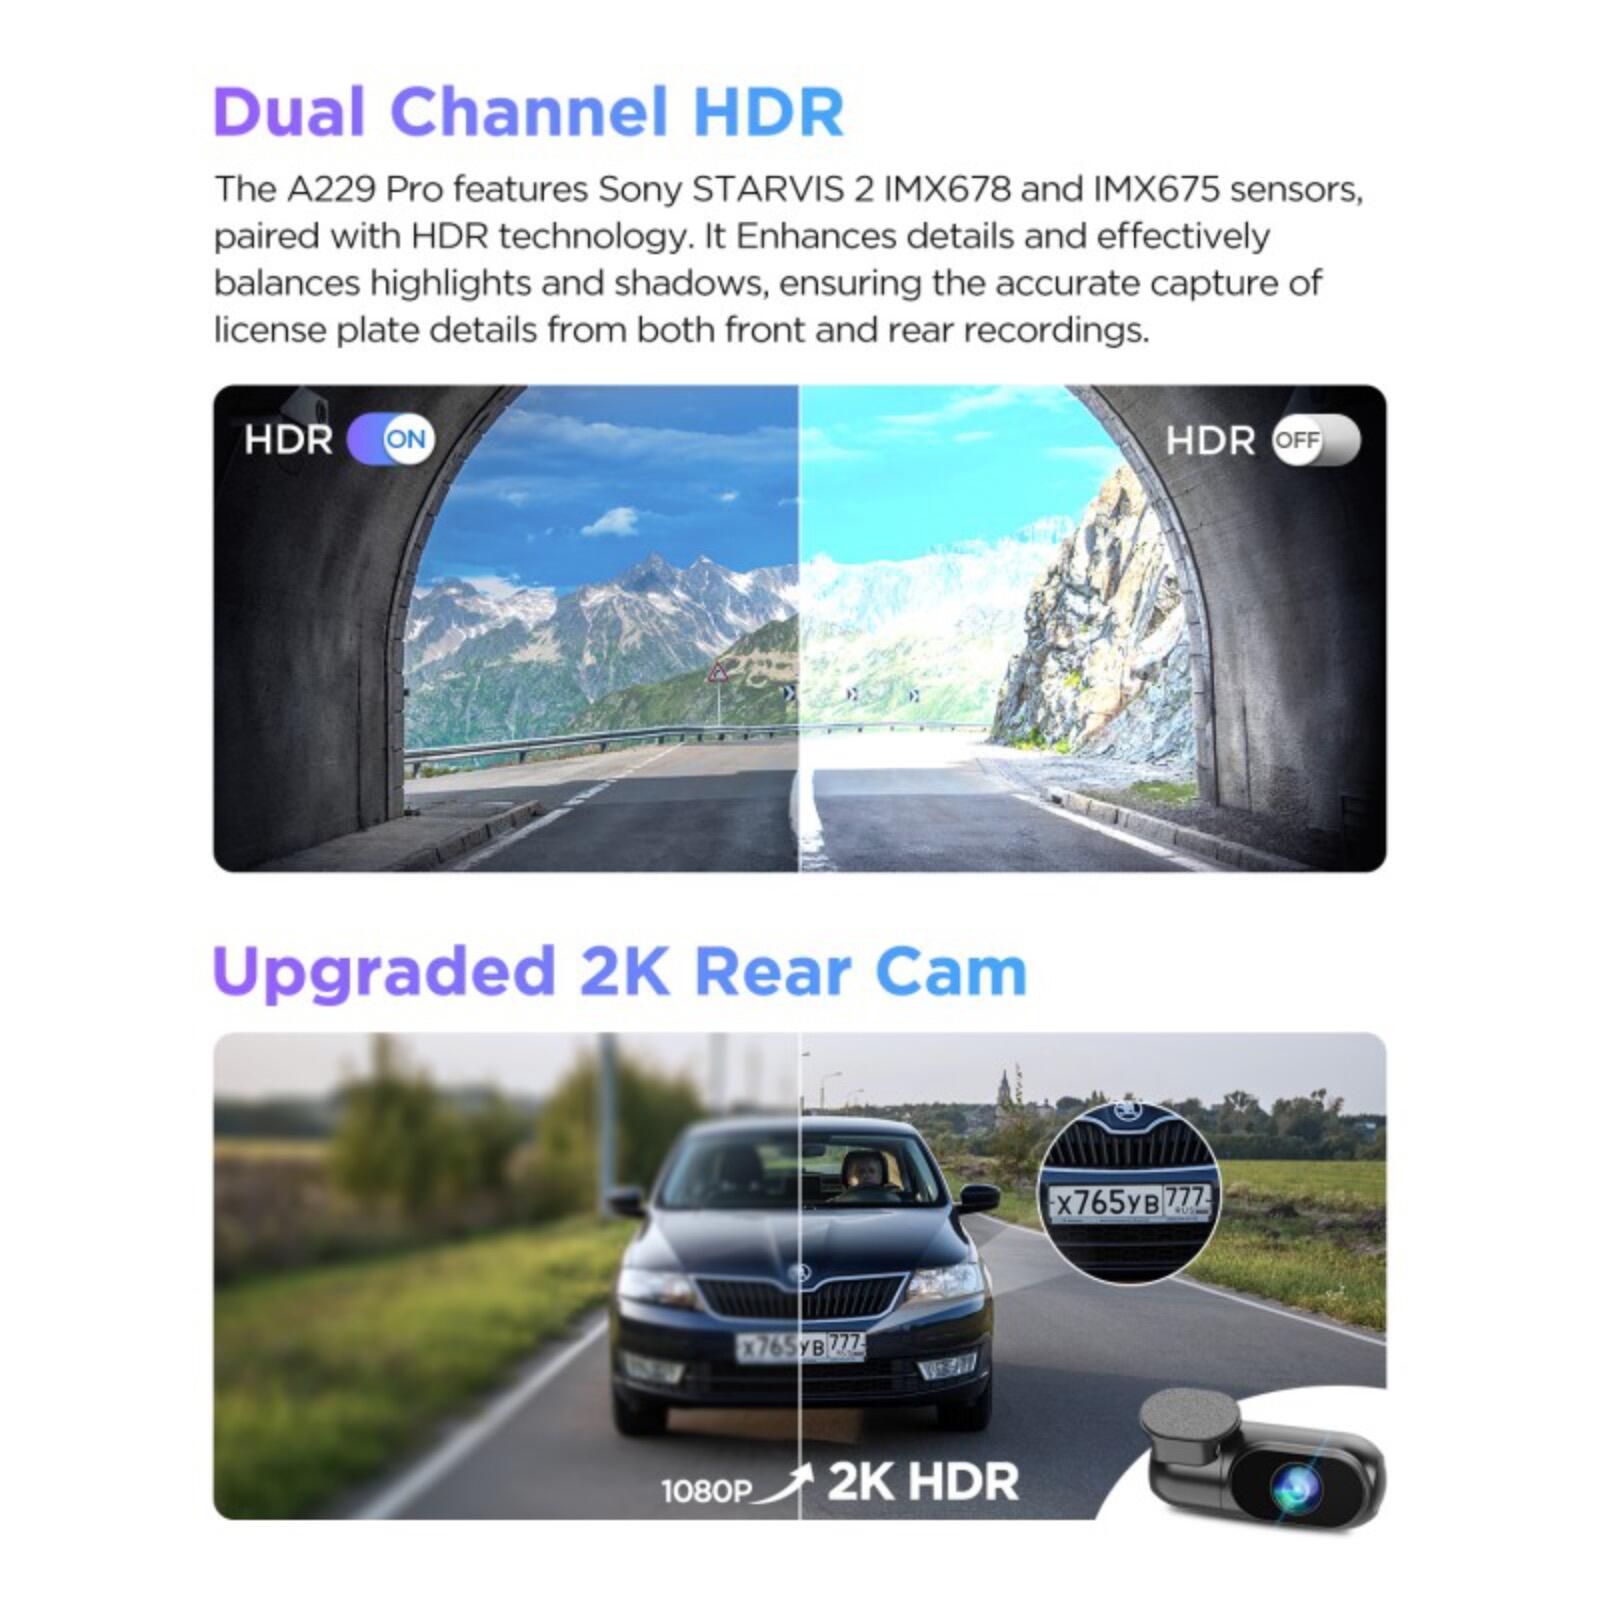 VIOFO 4K HDR Dash Cam Front and Rear A139 Pro 2CH , STARVIS 2